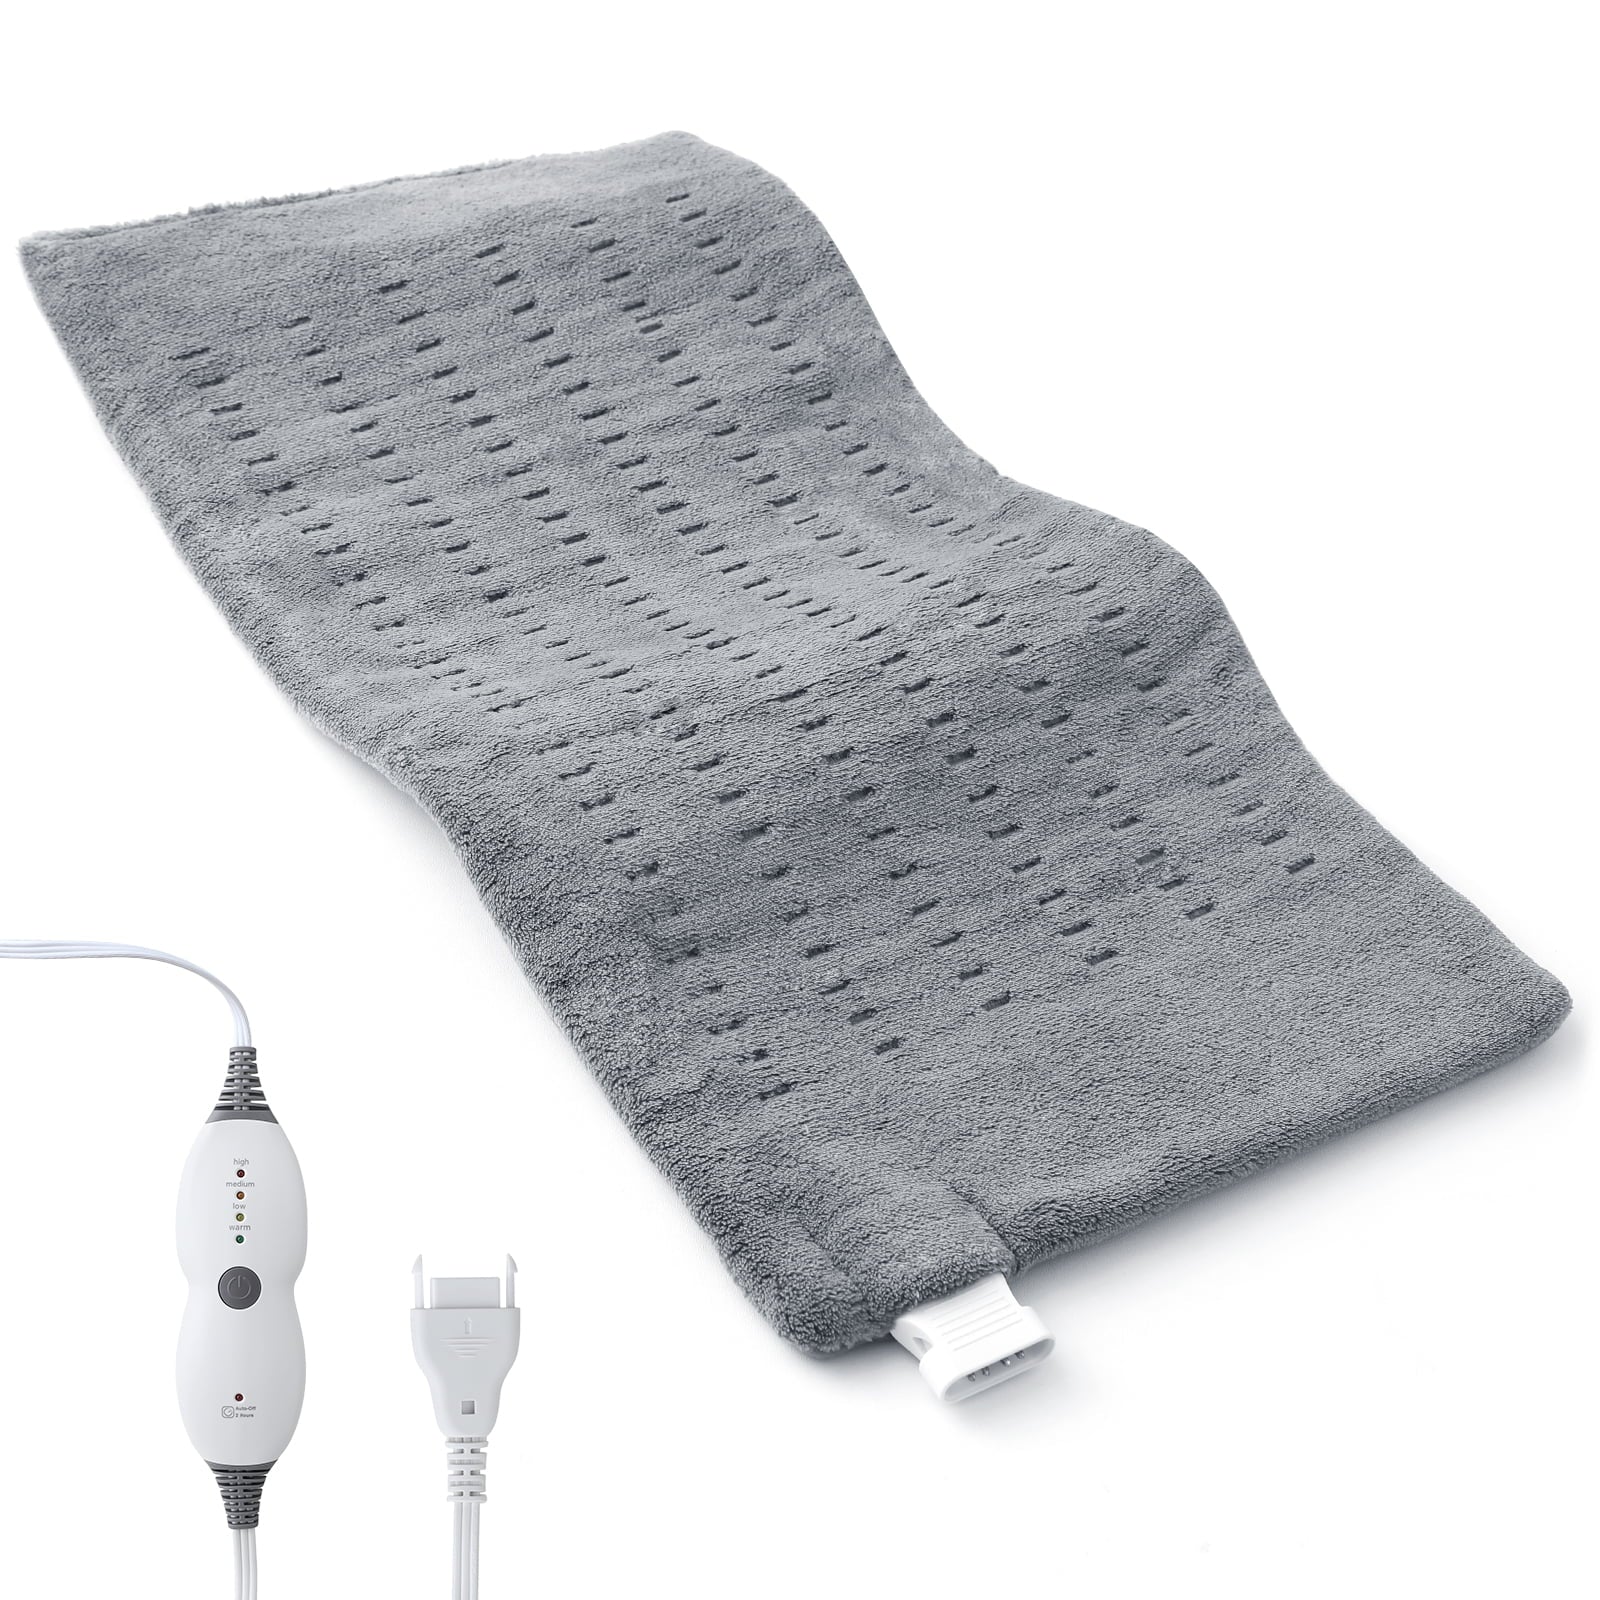 Electric-heated hot water mat